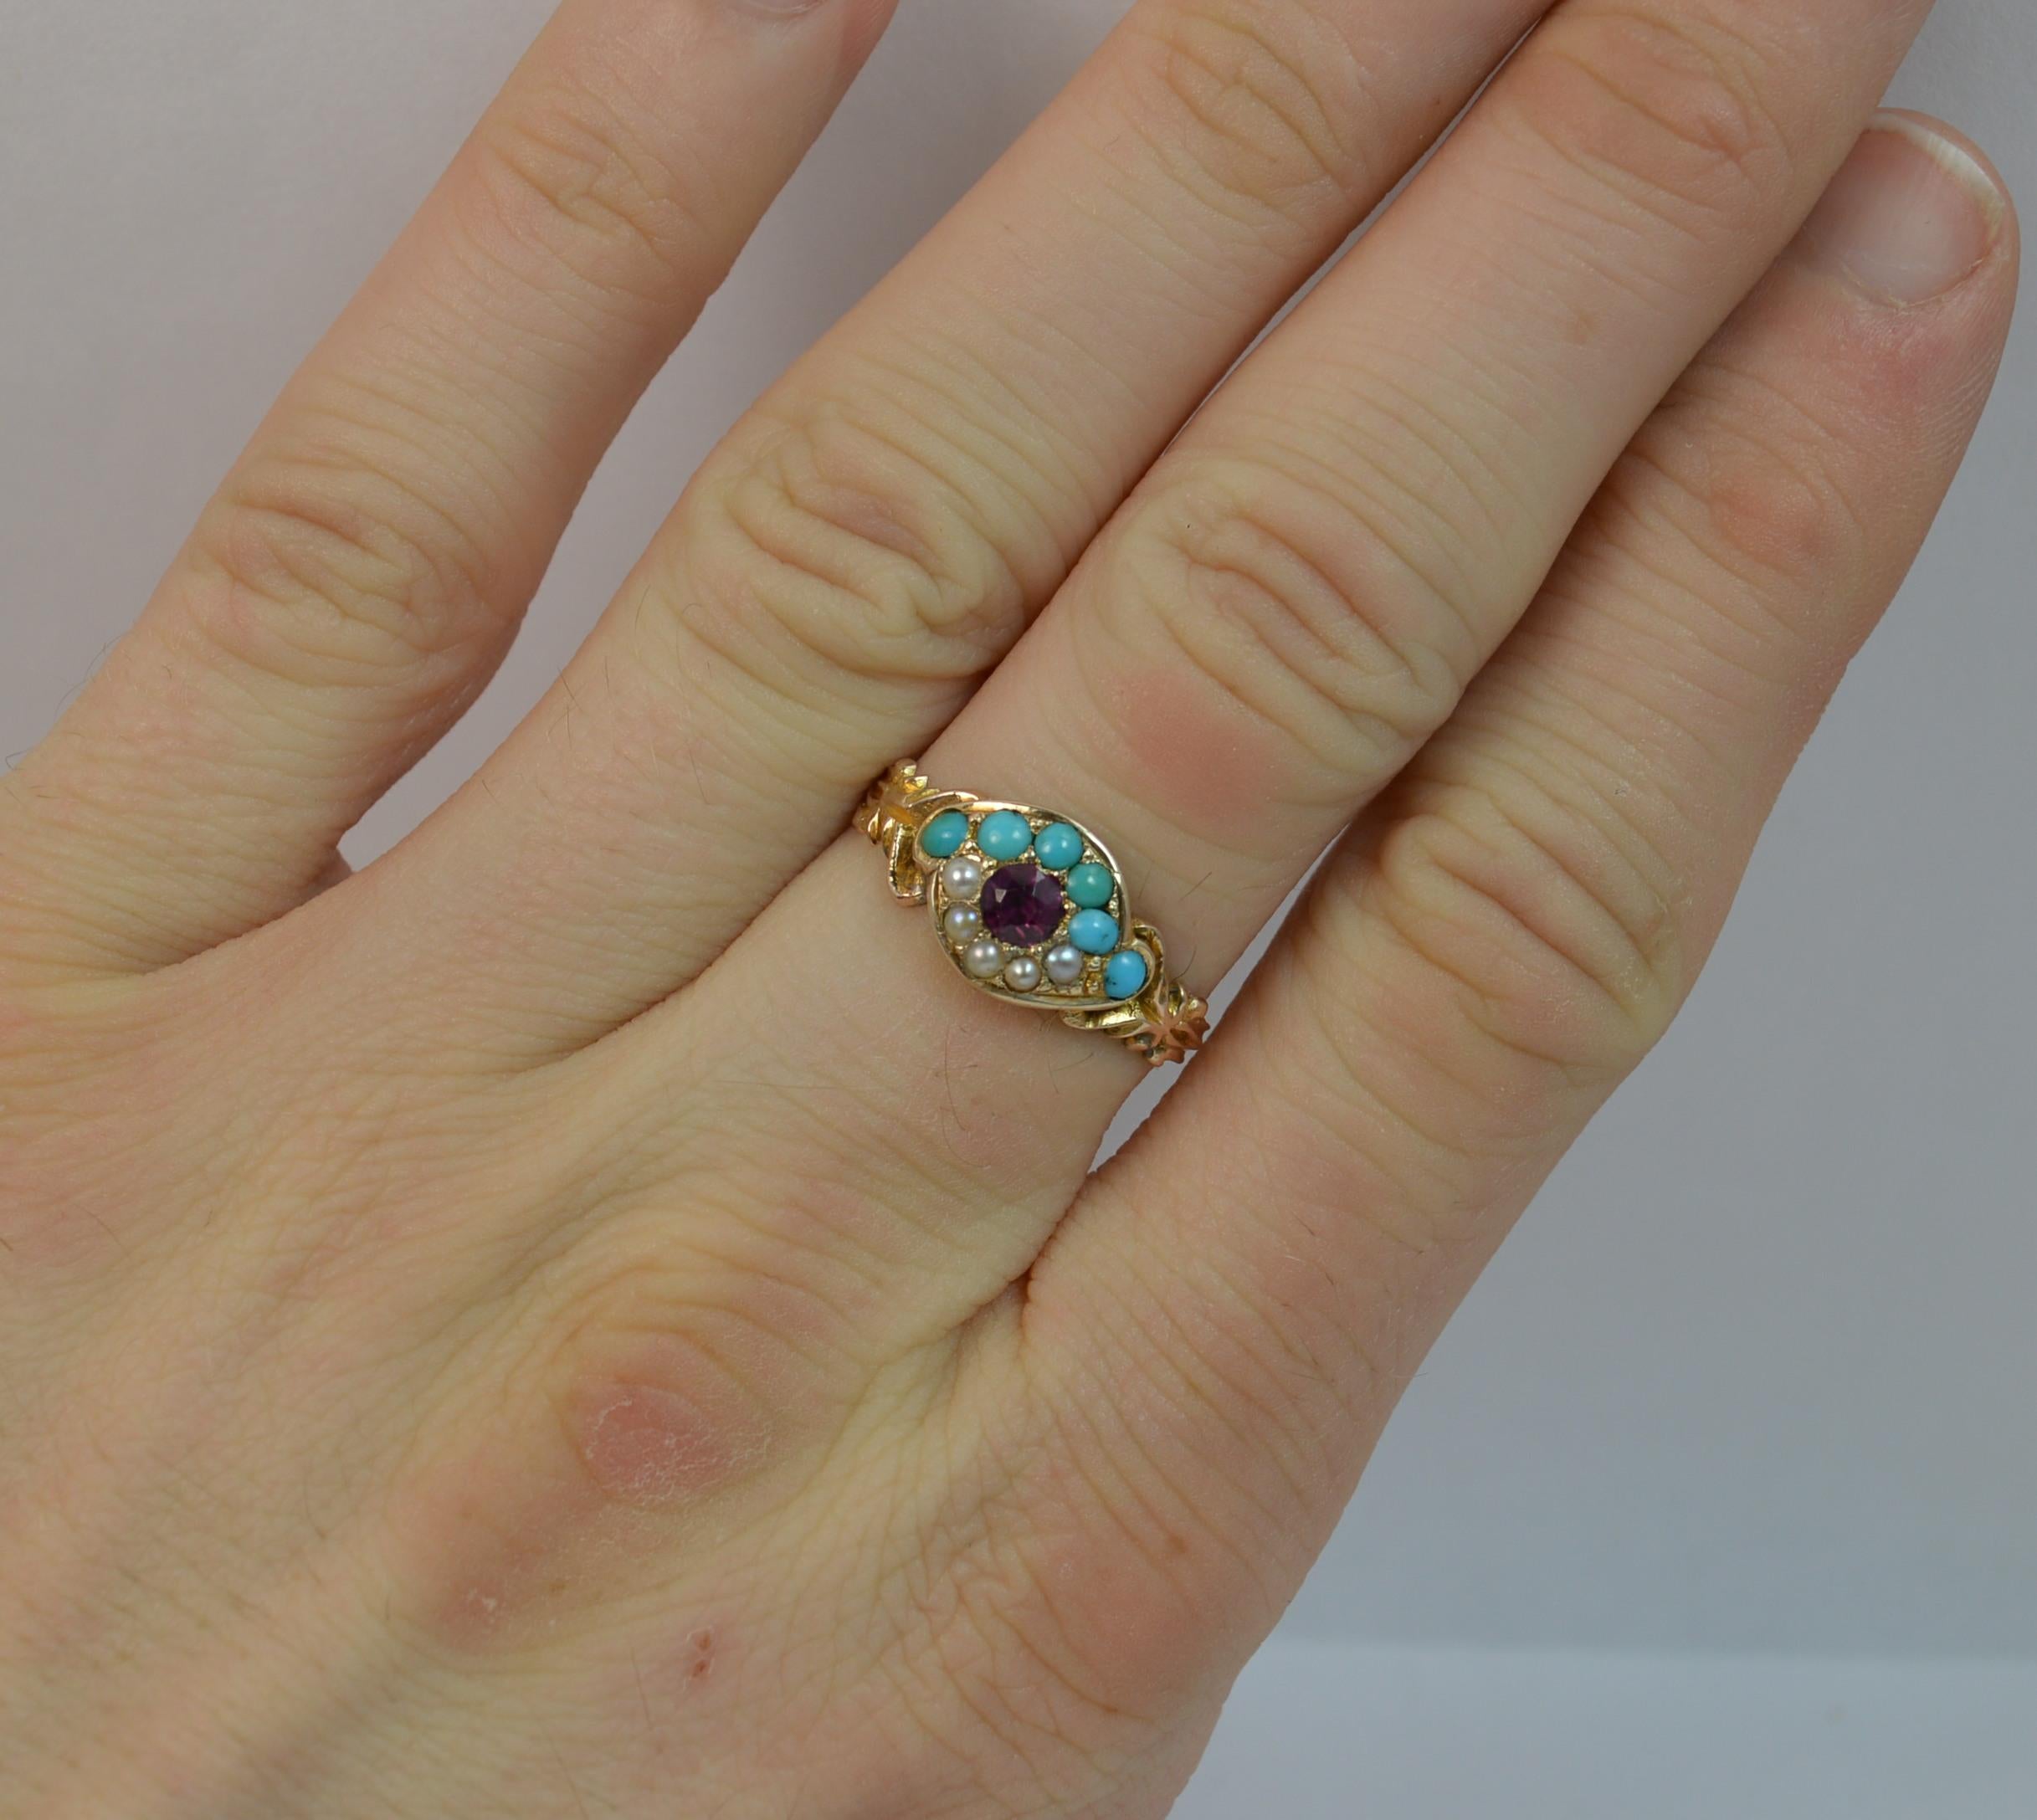 An early Victorian period 'all seeing eye' cluster ring. Modelled in a high carat gold and designed with a garnet to the centre and turquoise and seed pearl surround.
Size P 1/2 UK, 8 US
8.7mm wide band to the front.

2.0 grams. Securely set stones.